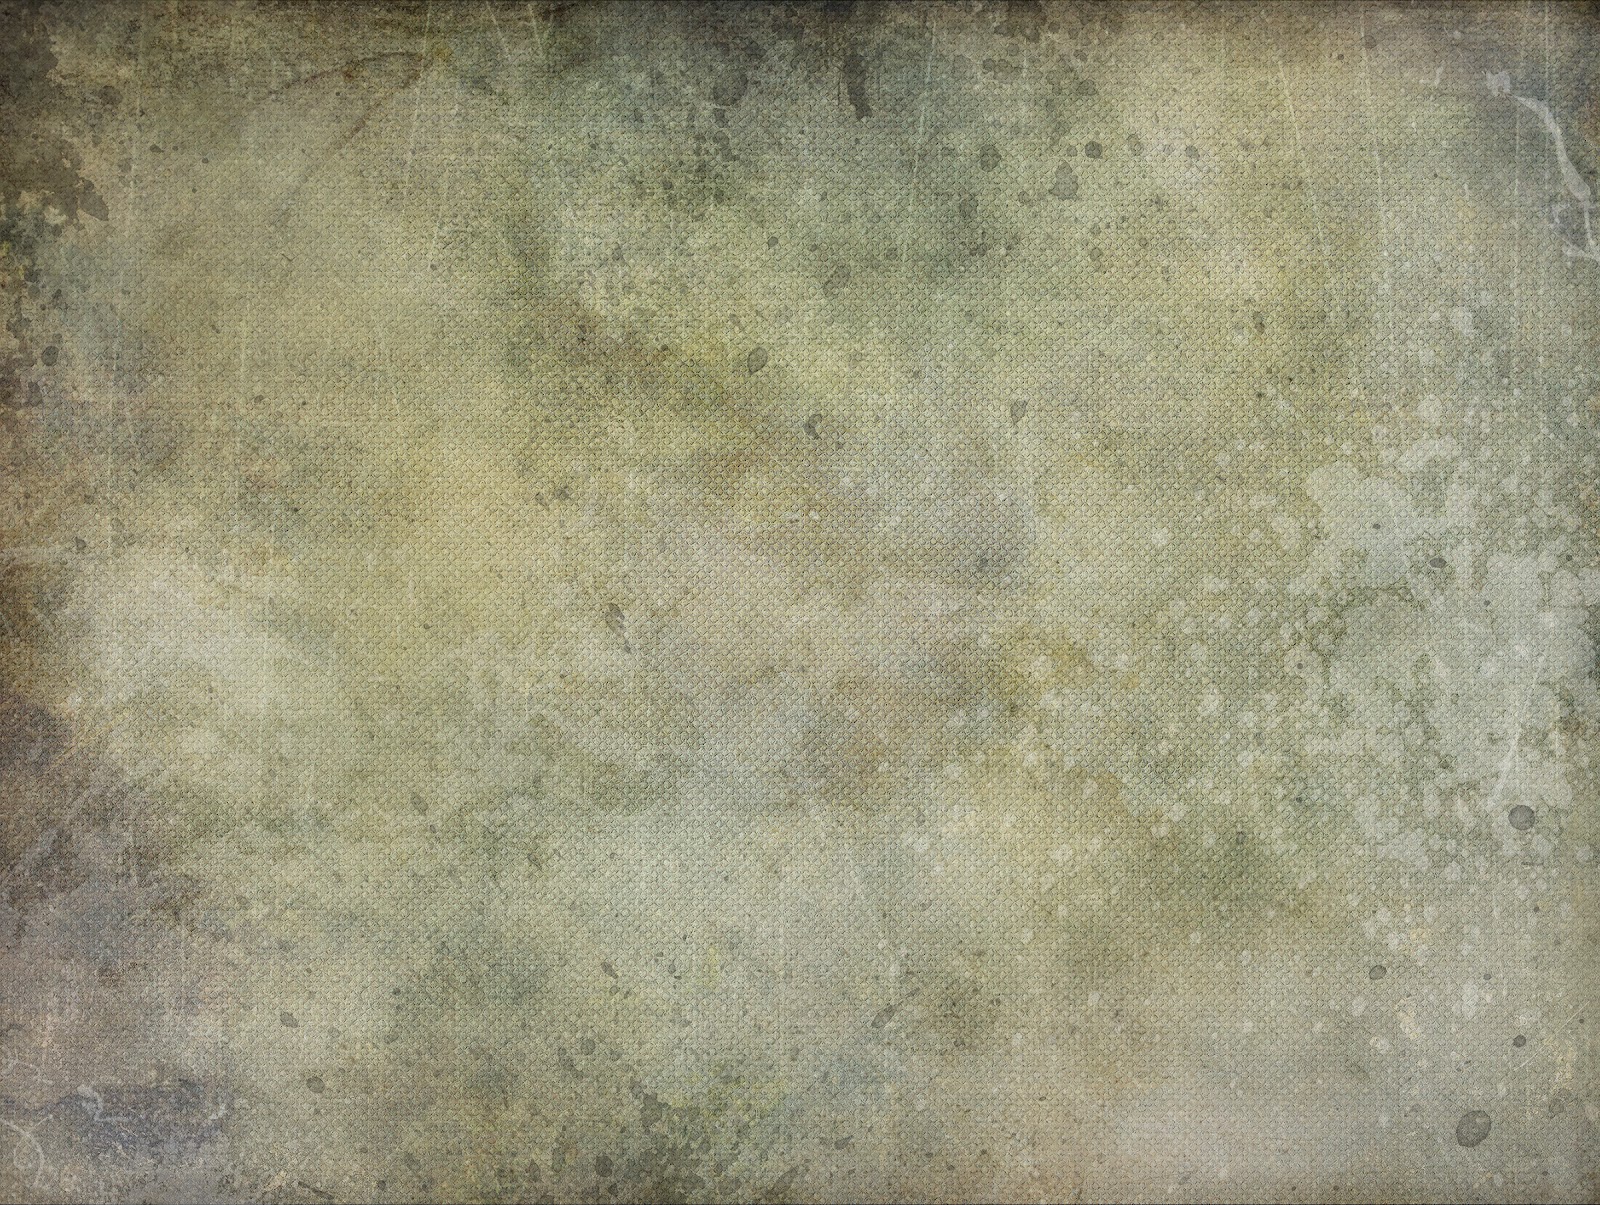 Shadowhouse Creations: Used Canvas Texture Set and Sample ...